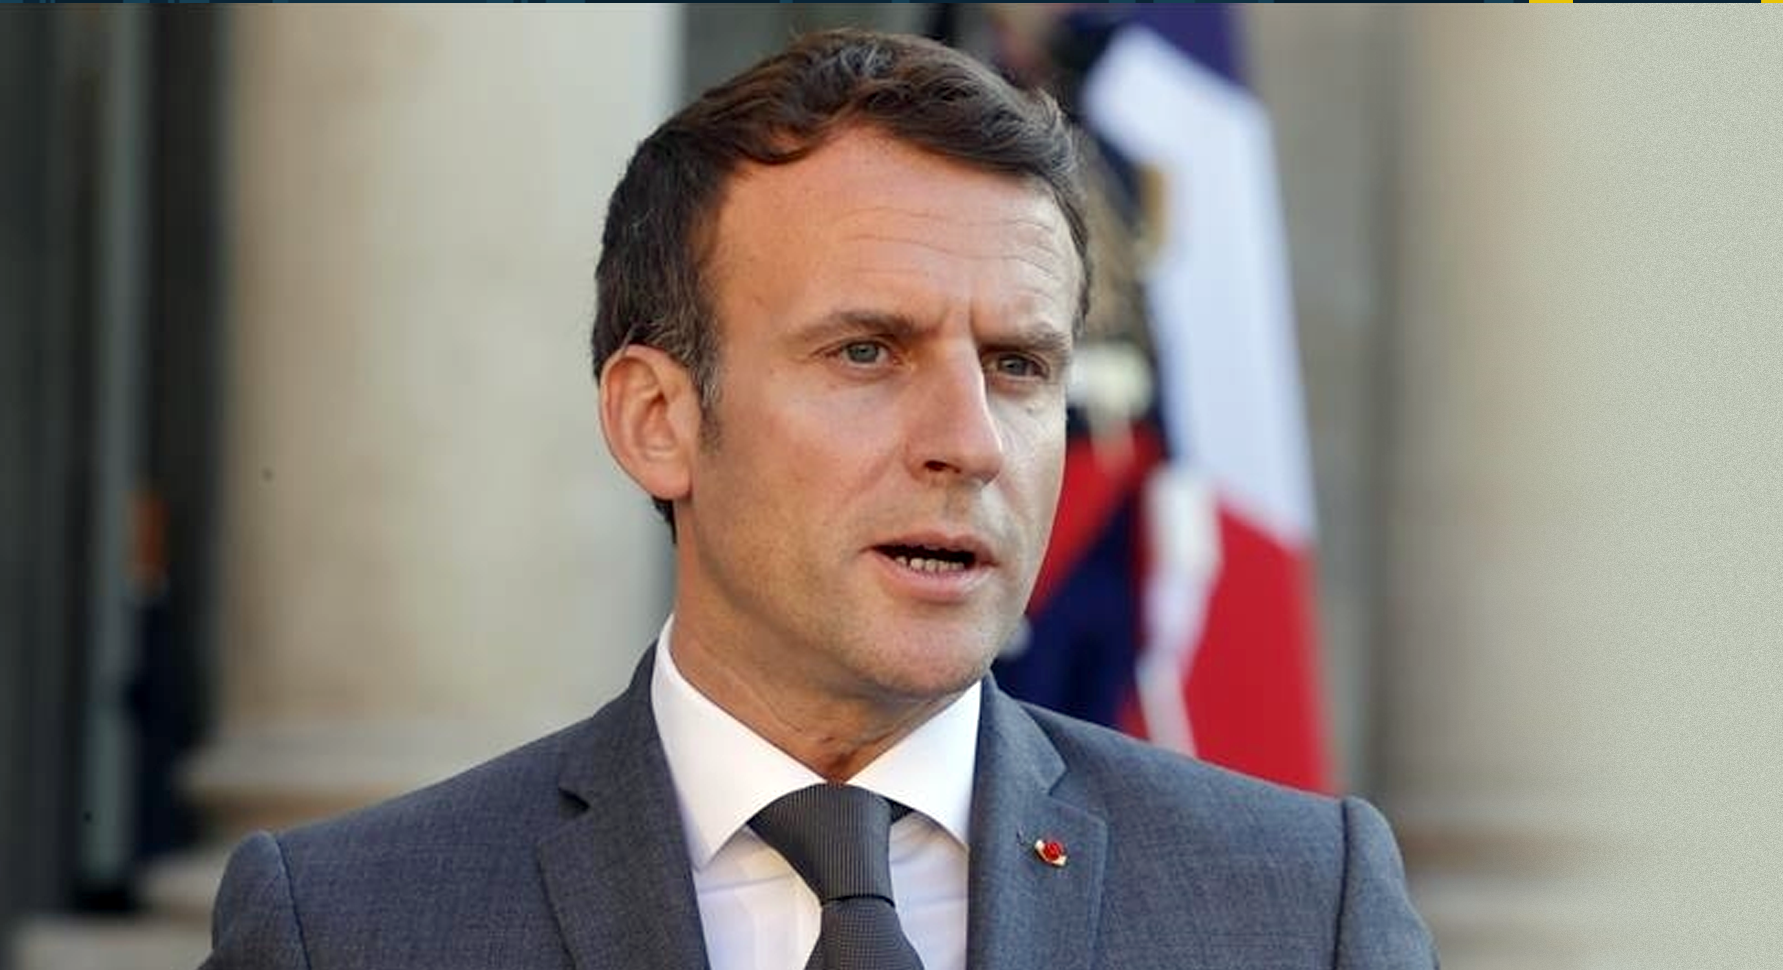 France's Macron ‘hesitant’, ’weary’ after 100 days in his second term